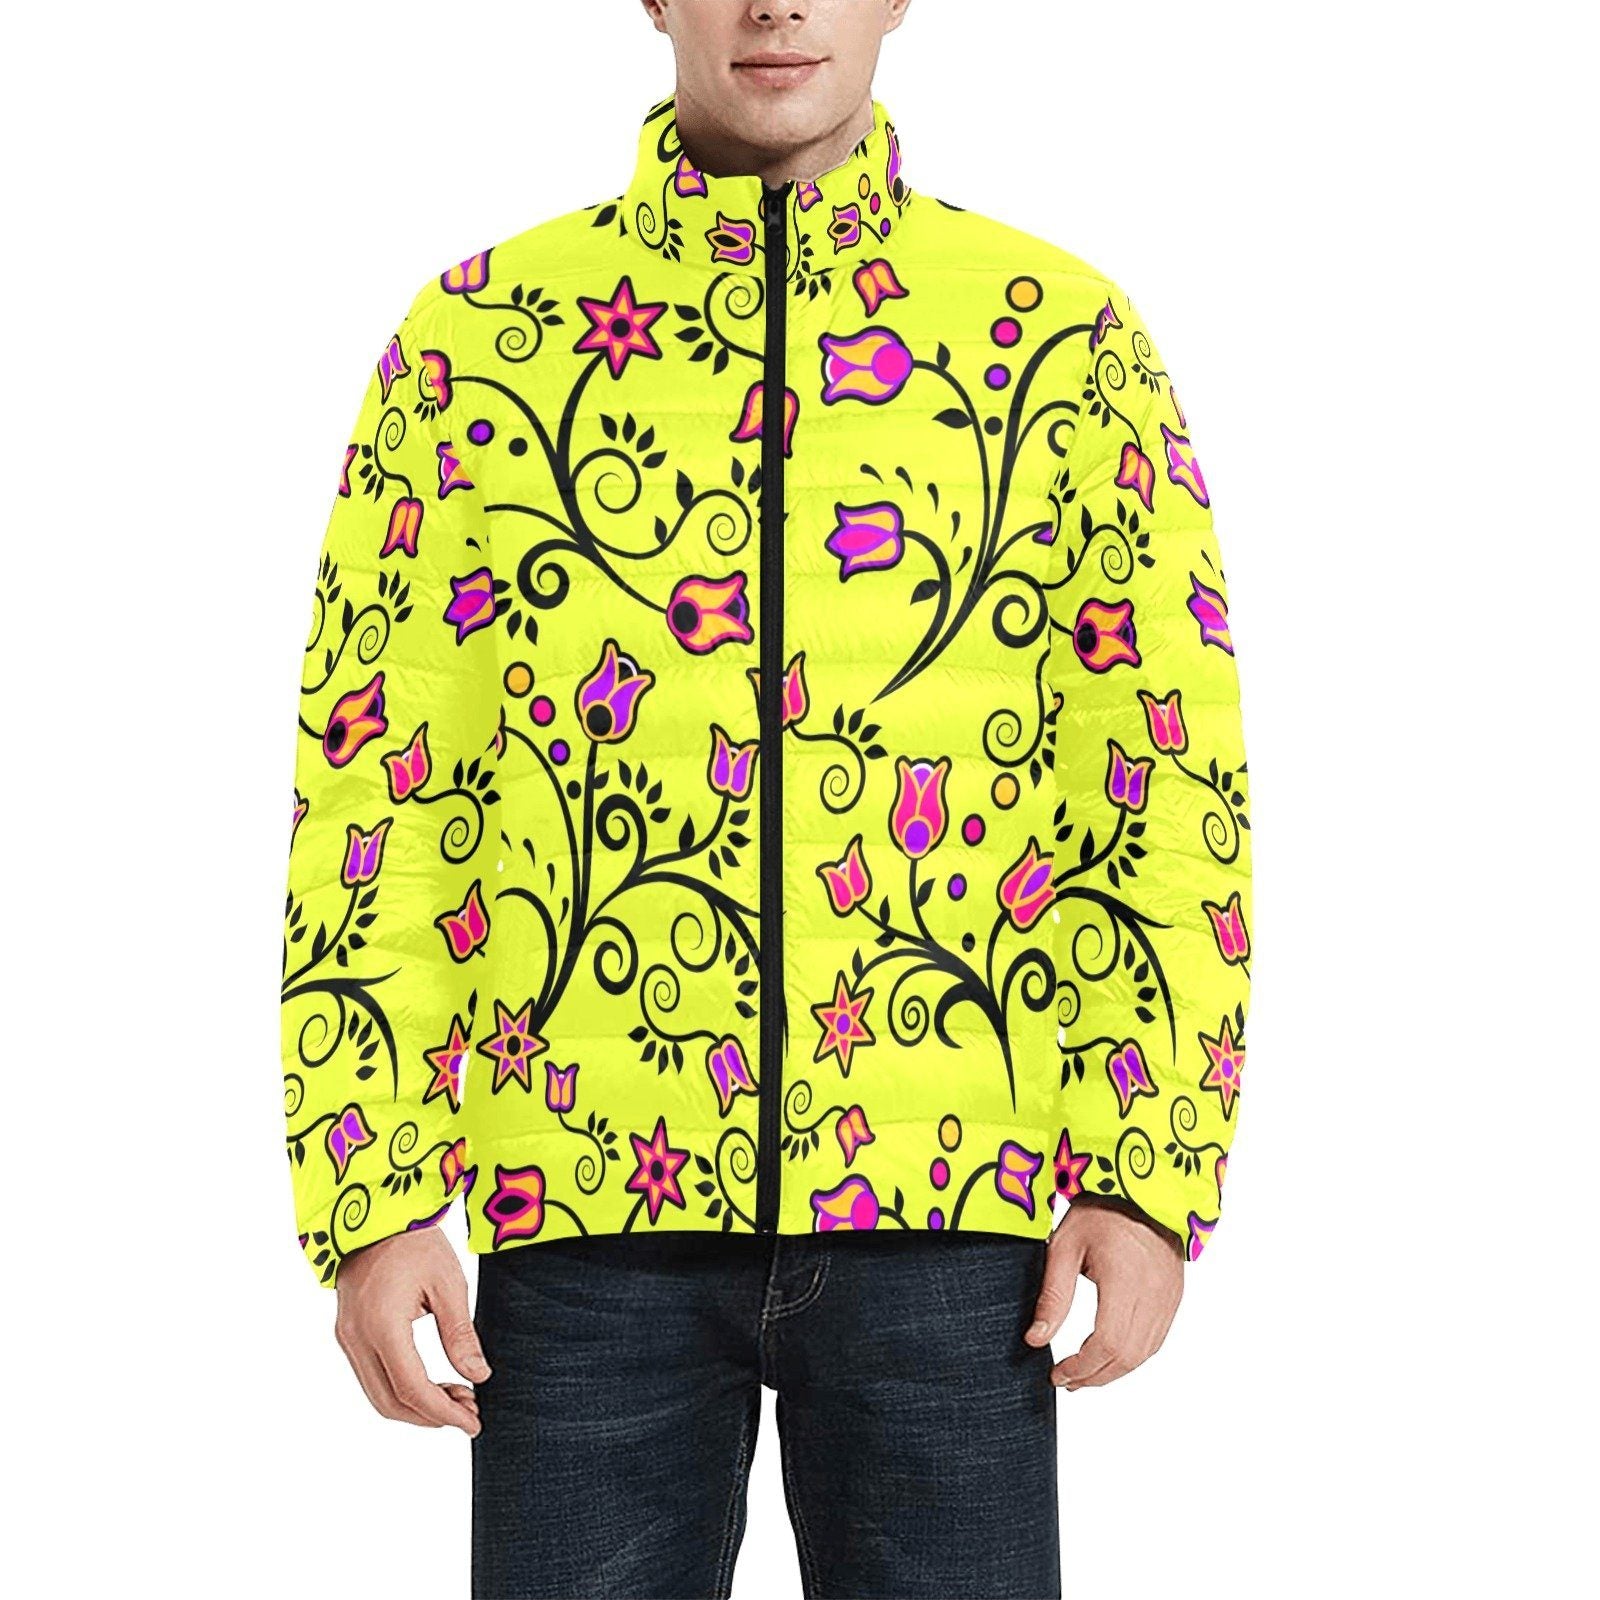 Key Lime Star Men's Stand Collar Padded Jacket (Model H41) Men's Stand Collar Padded Jacket (H41) e-joyer 